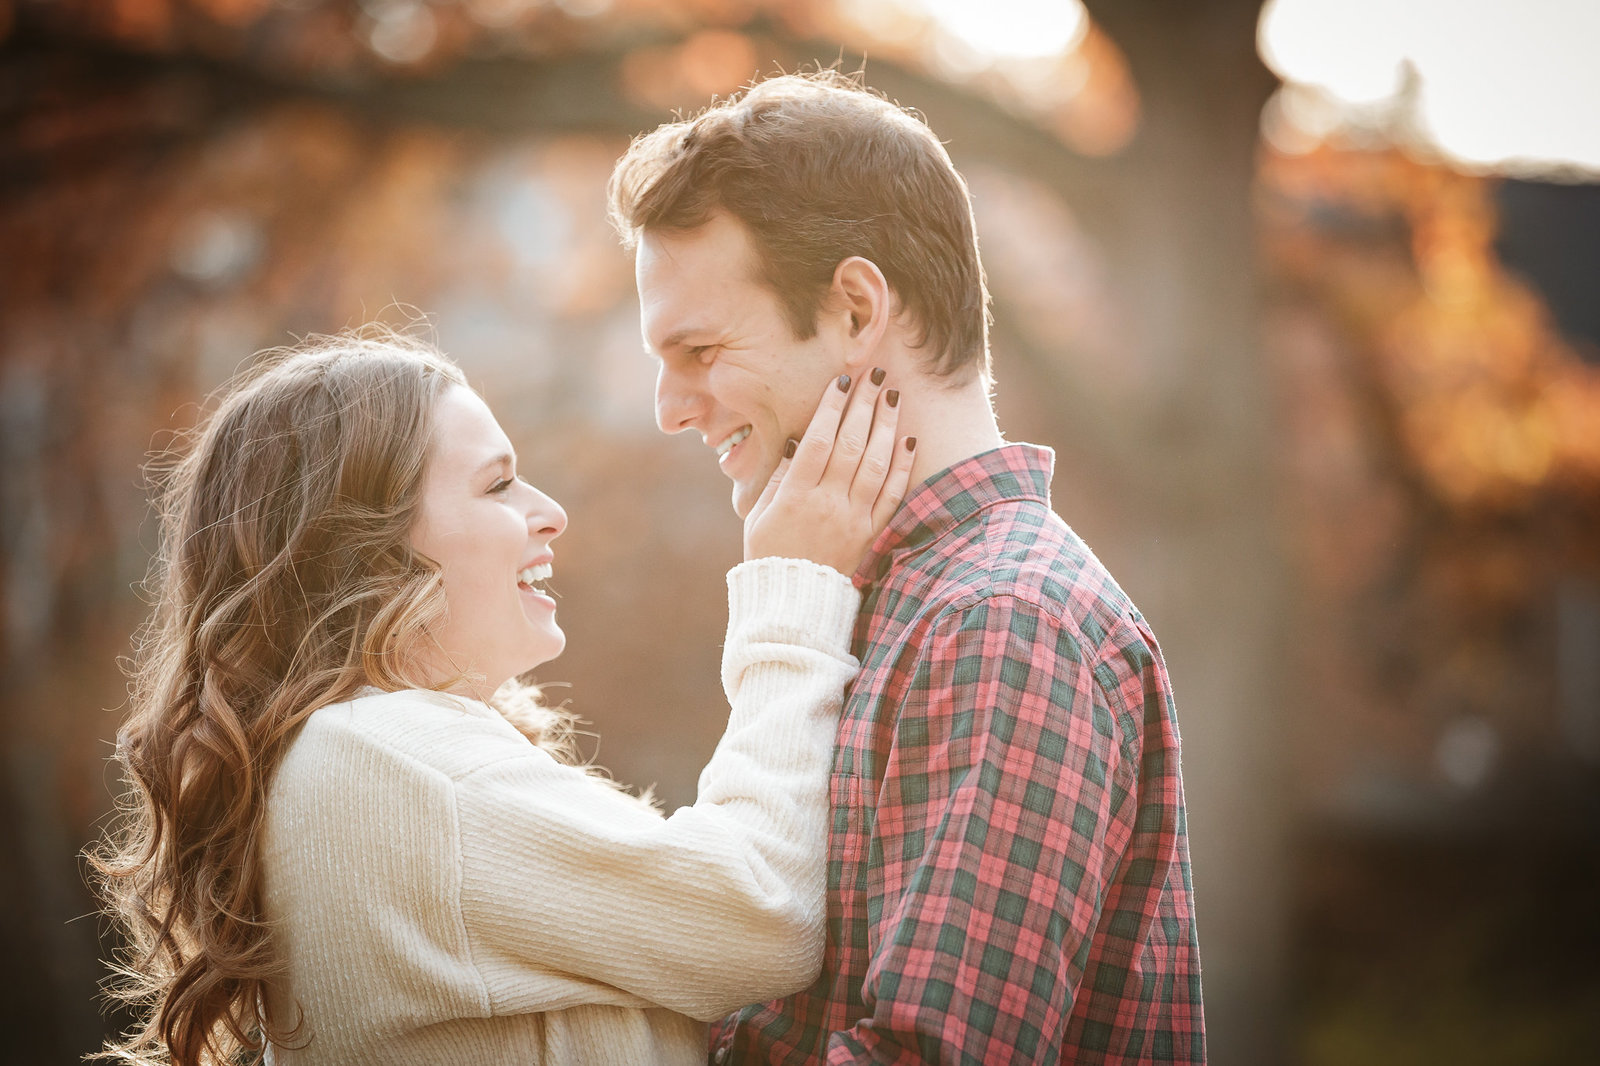 Edgerton Park Engagement Session in Connecticut by Jamerlyn Brown Photography